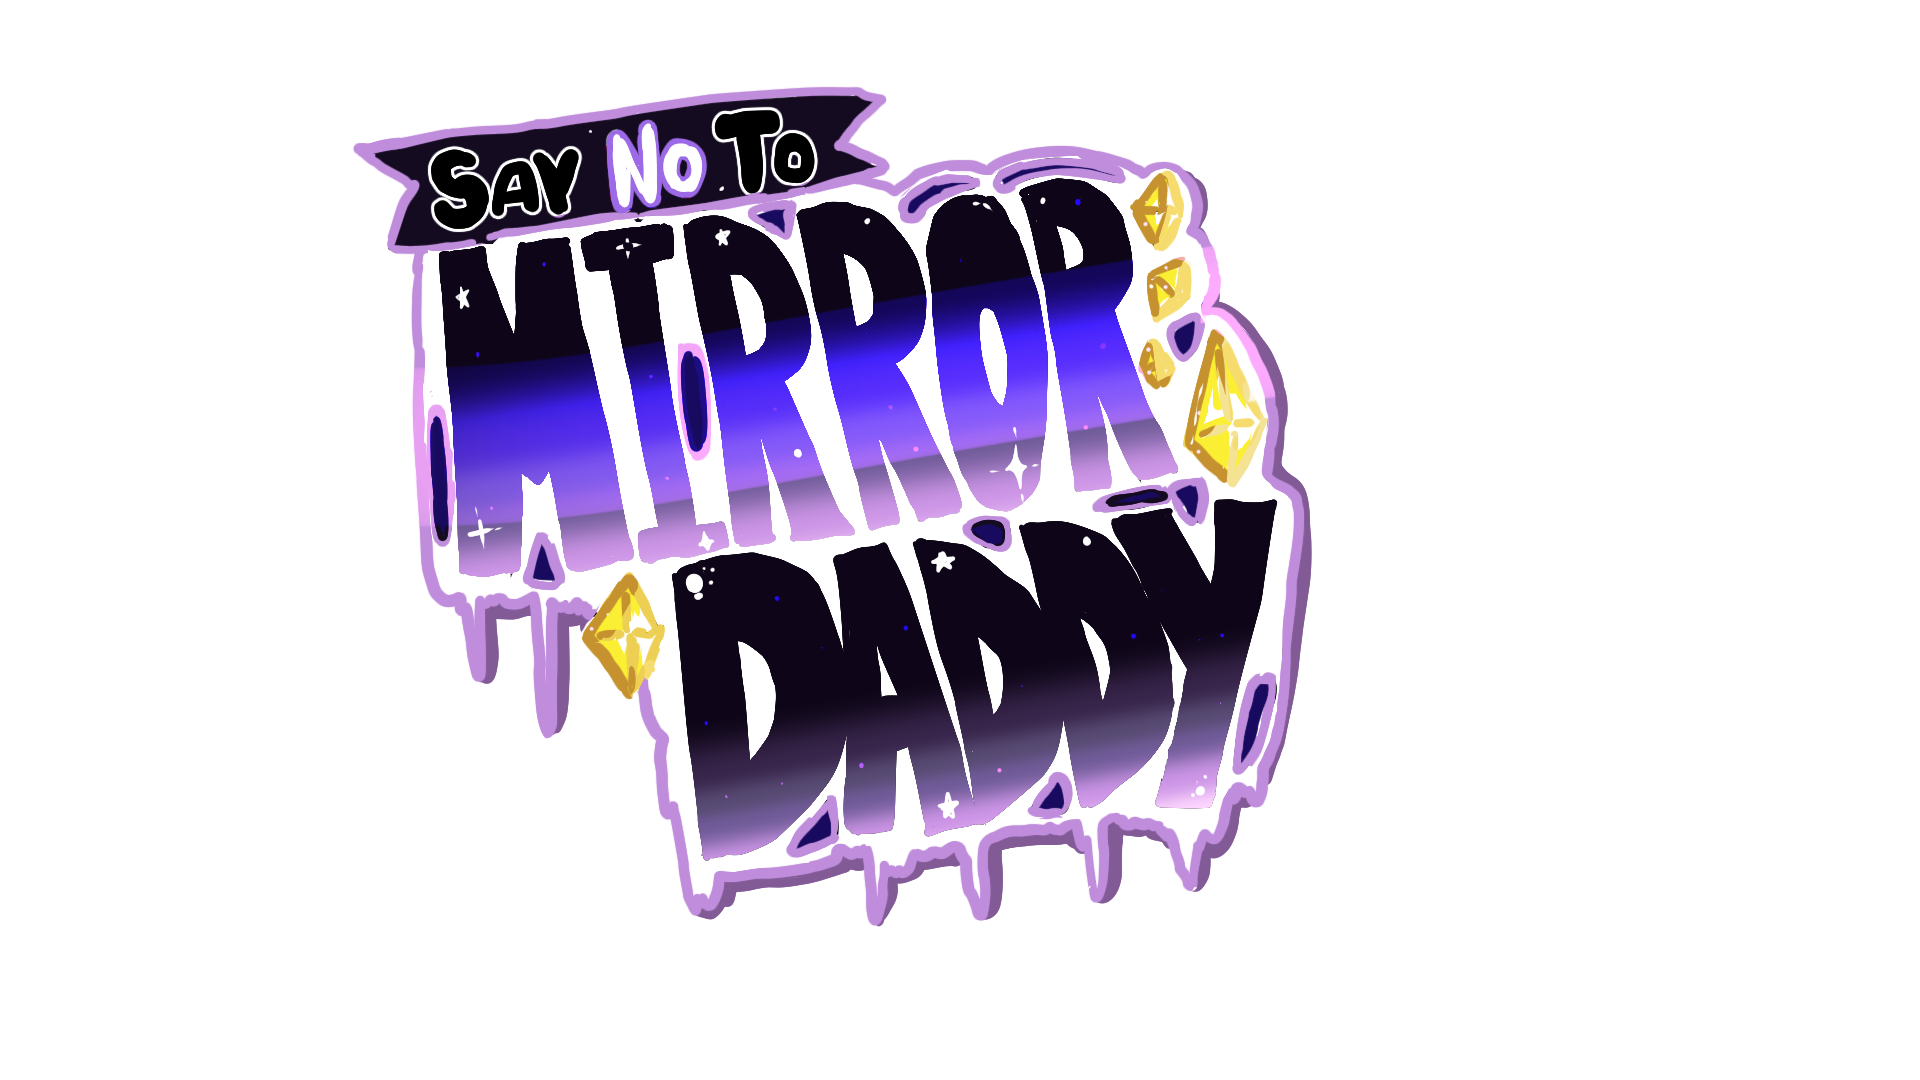 Say no to mirror daddy